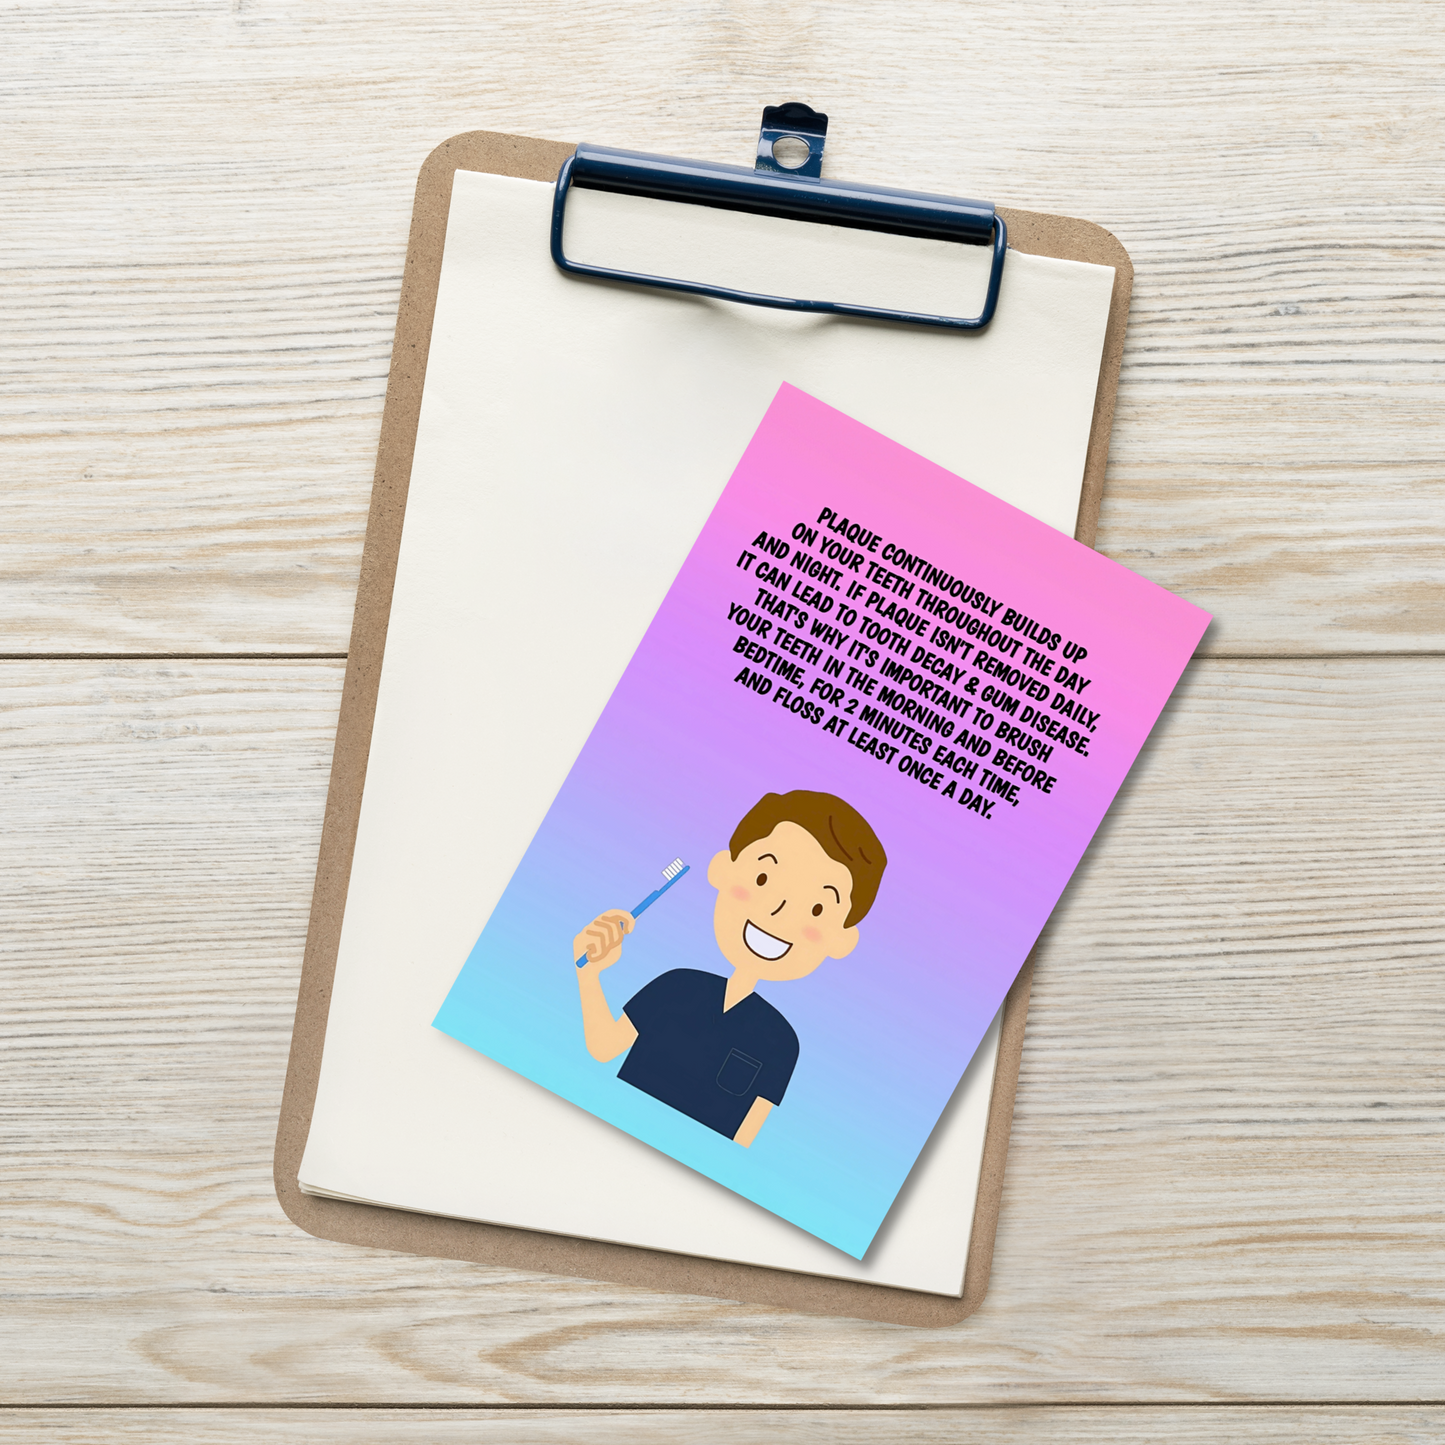 Oral Hygiene Cards- Plaque Continuously Builds Up On Your Teeth Throughout The Day And Night